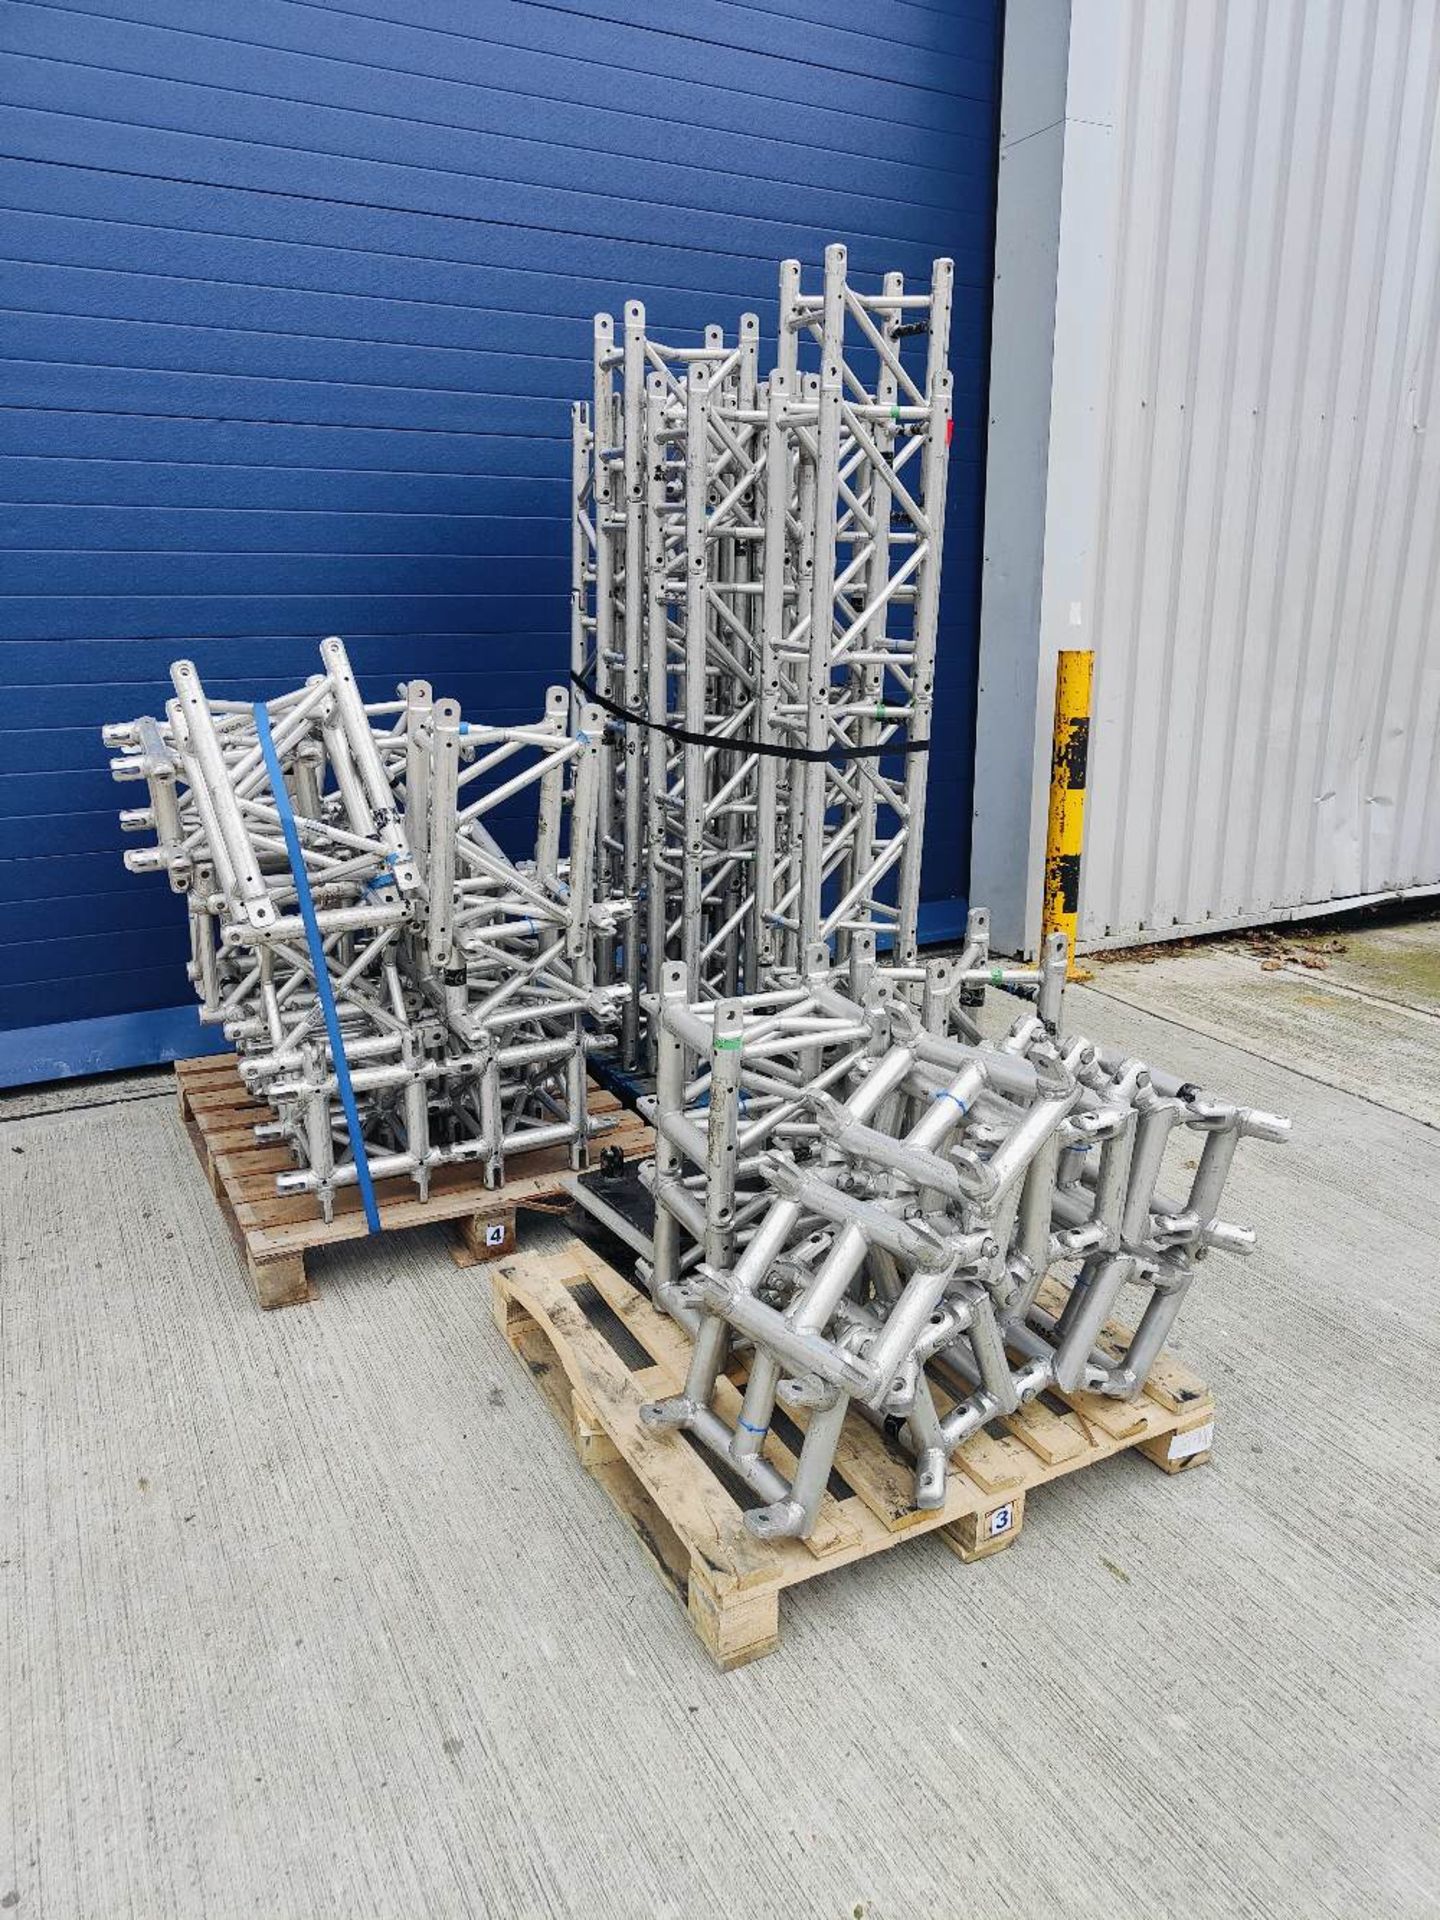 Large Quantity of Slick Minibeam Truss Sections and Base Plates